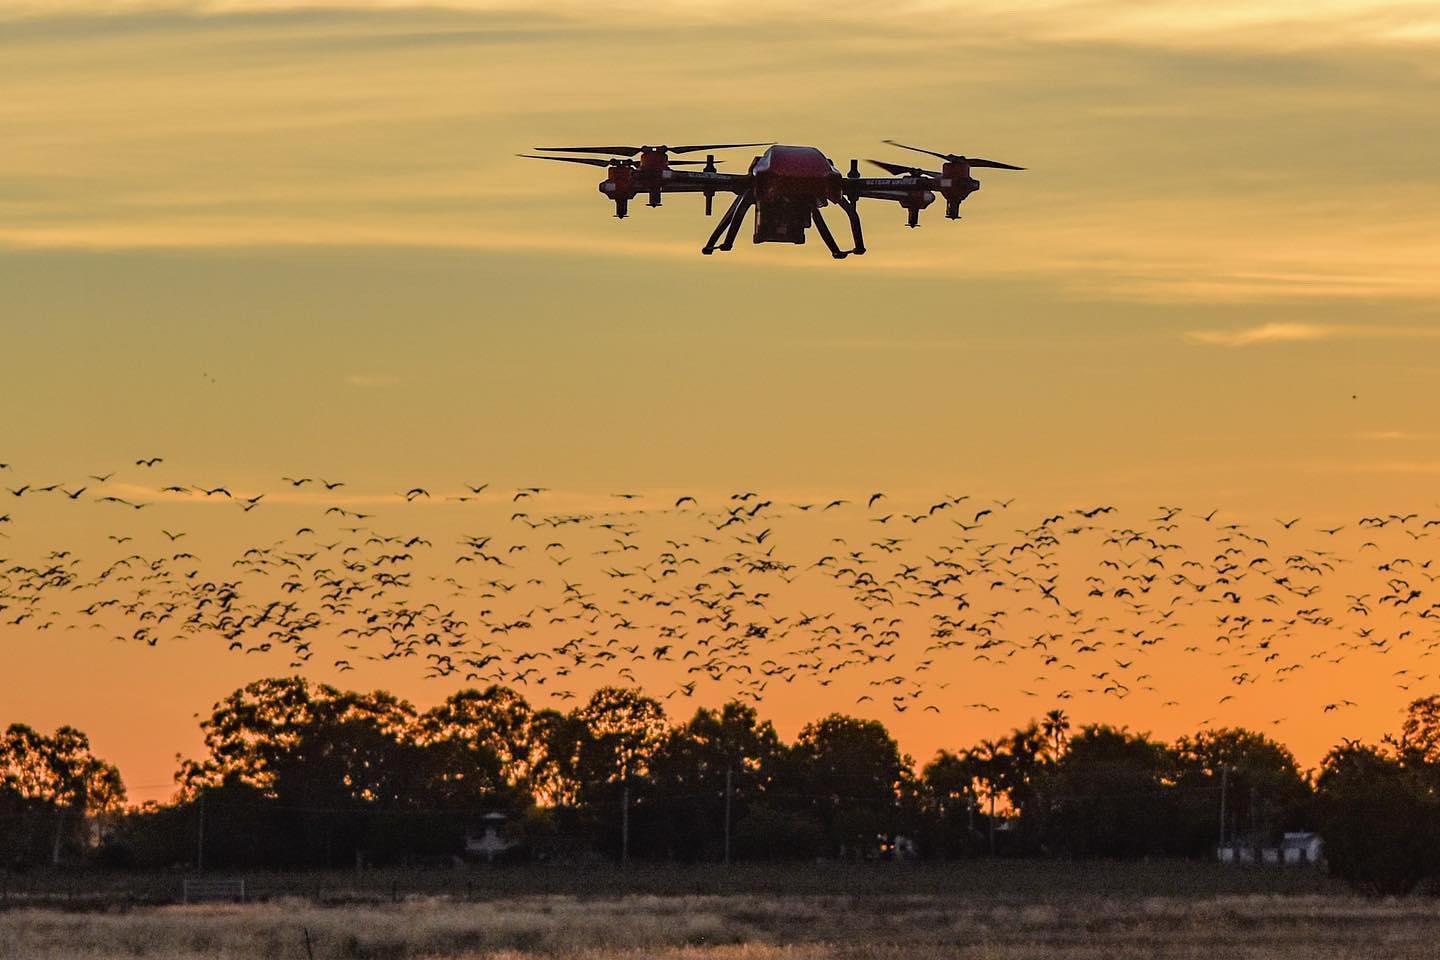 Drone as a new tool for bird deterrence